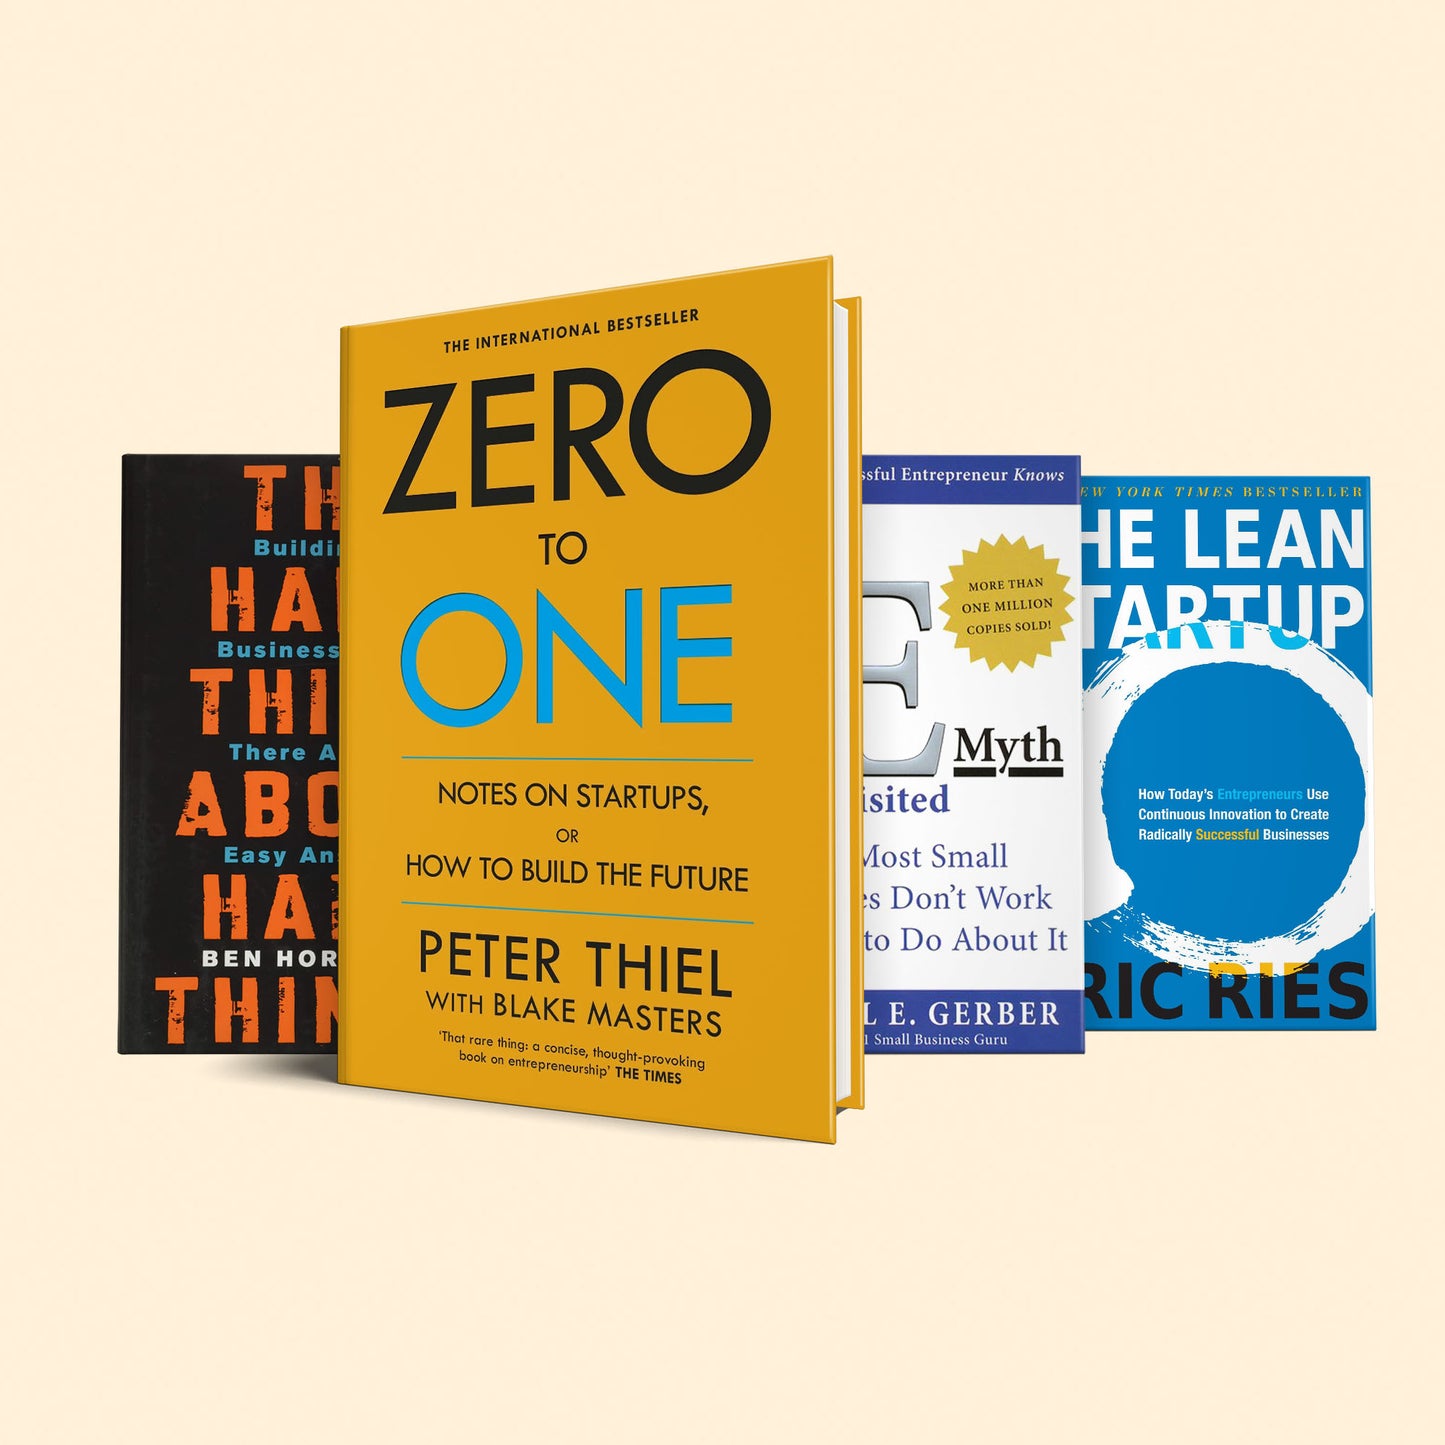 5 Books to scale your startup: (Zero to one, E-myth revisited, The hard thing about hard things, The lean startup, The 100$ startup